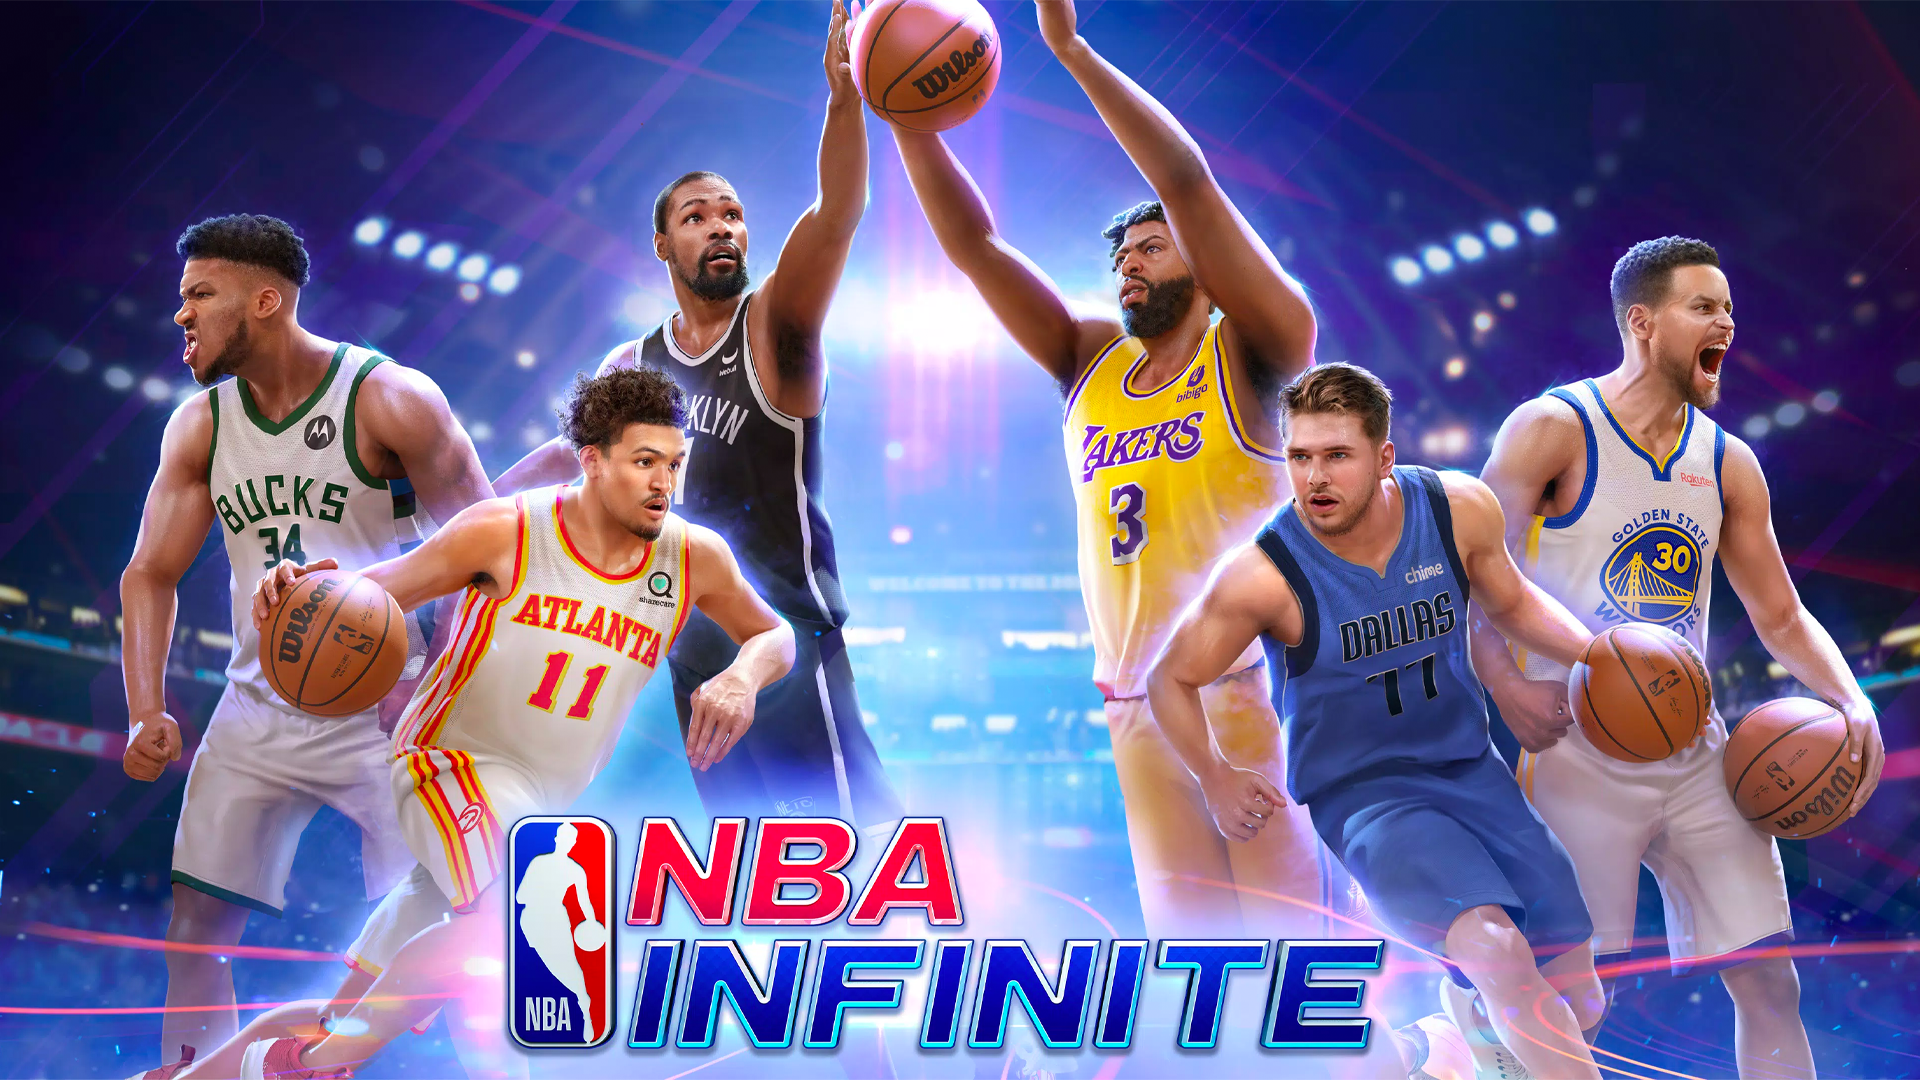 Do not buy NBA 2K24, join the closed beta test of this NBA Infinite now!